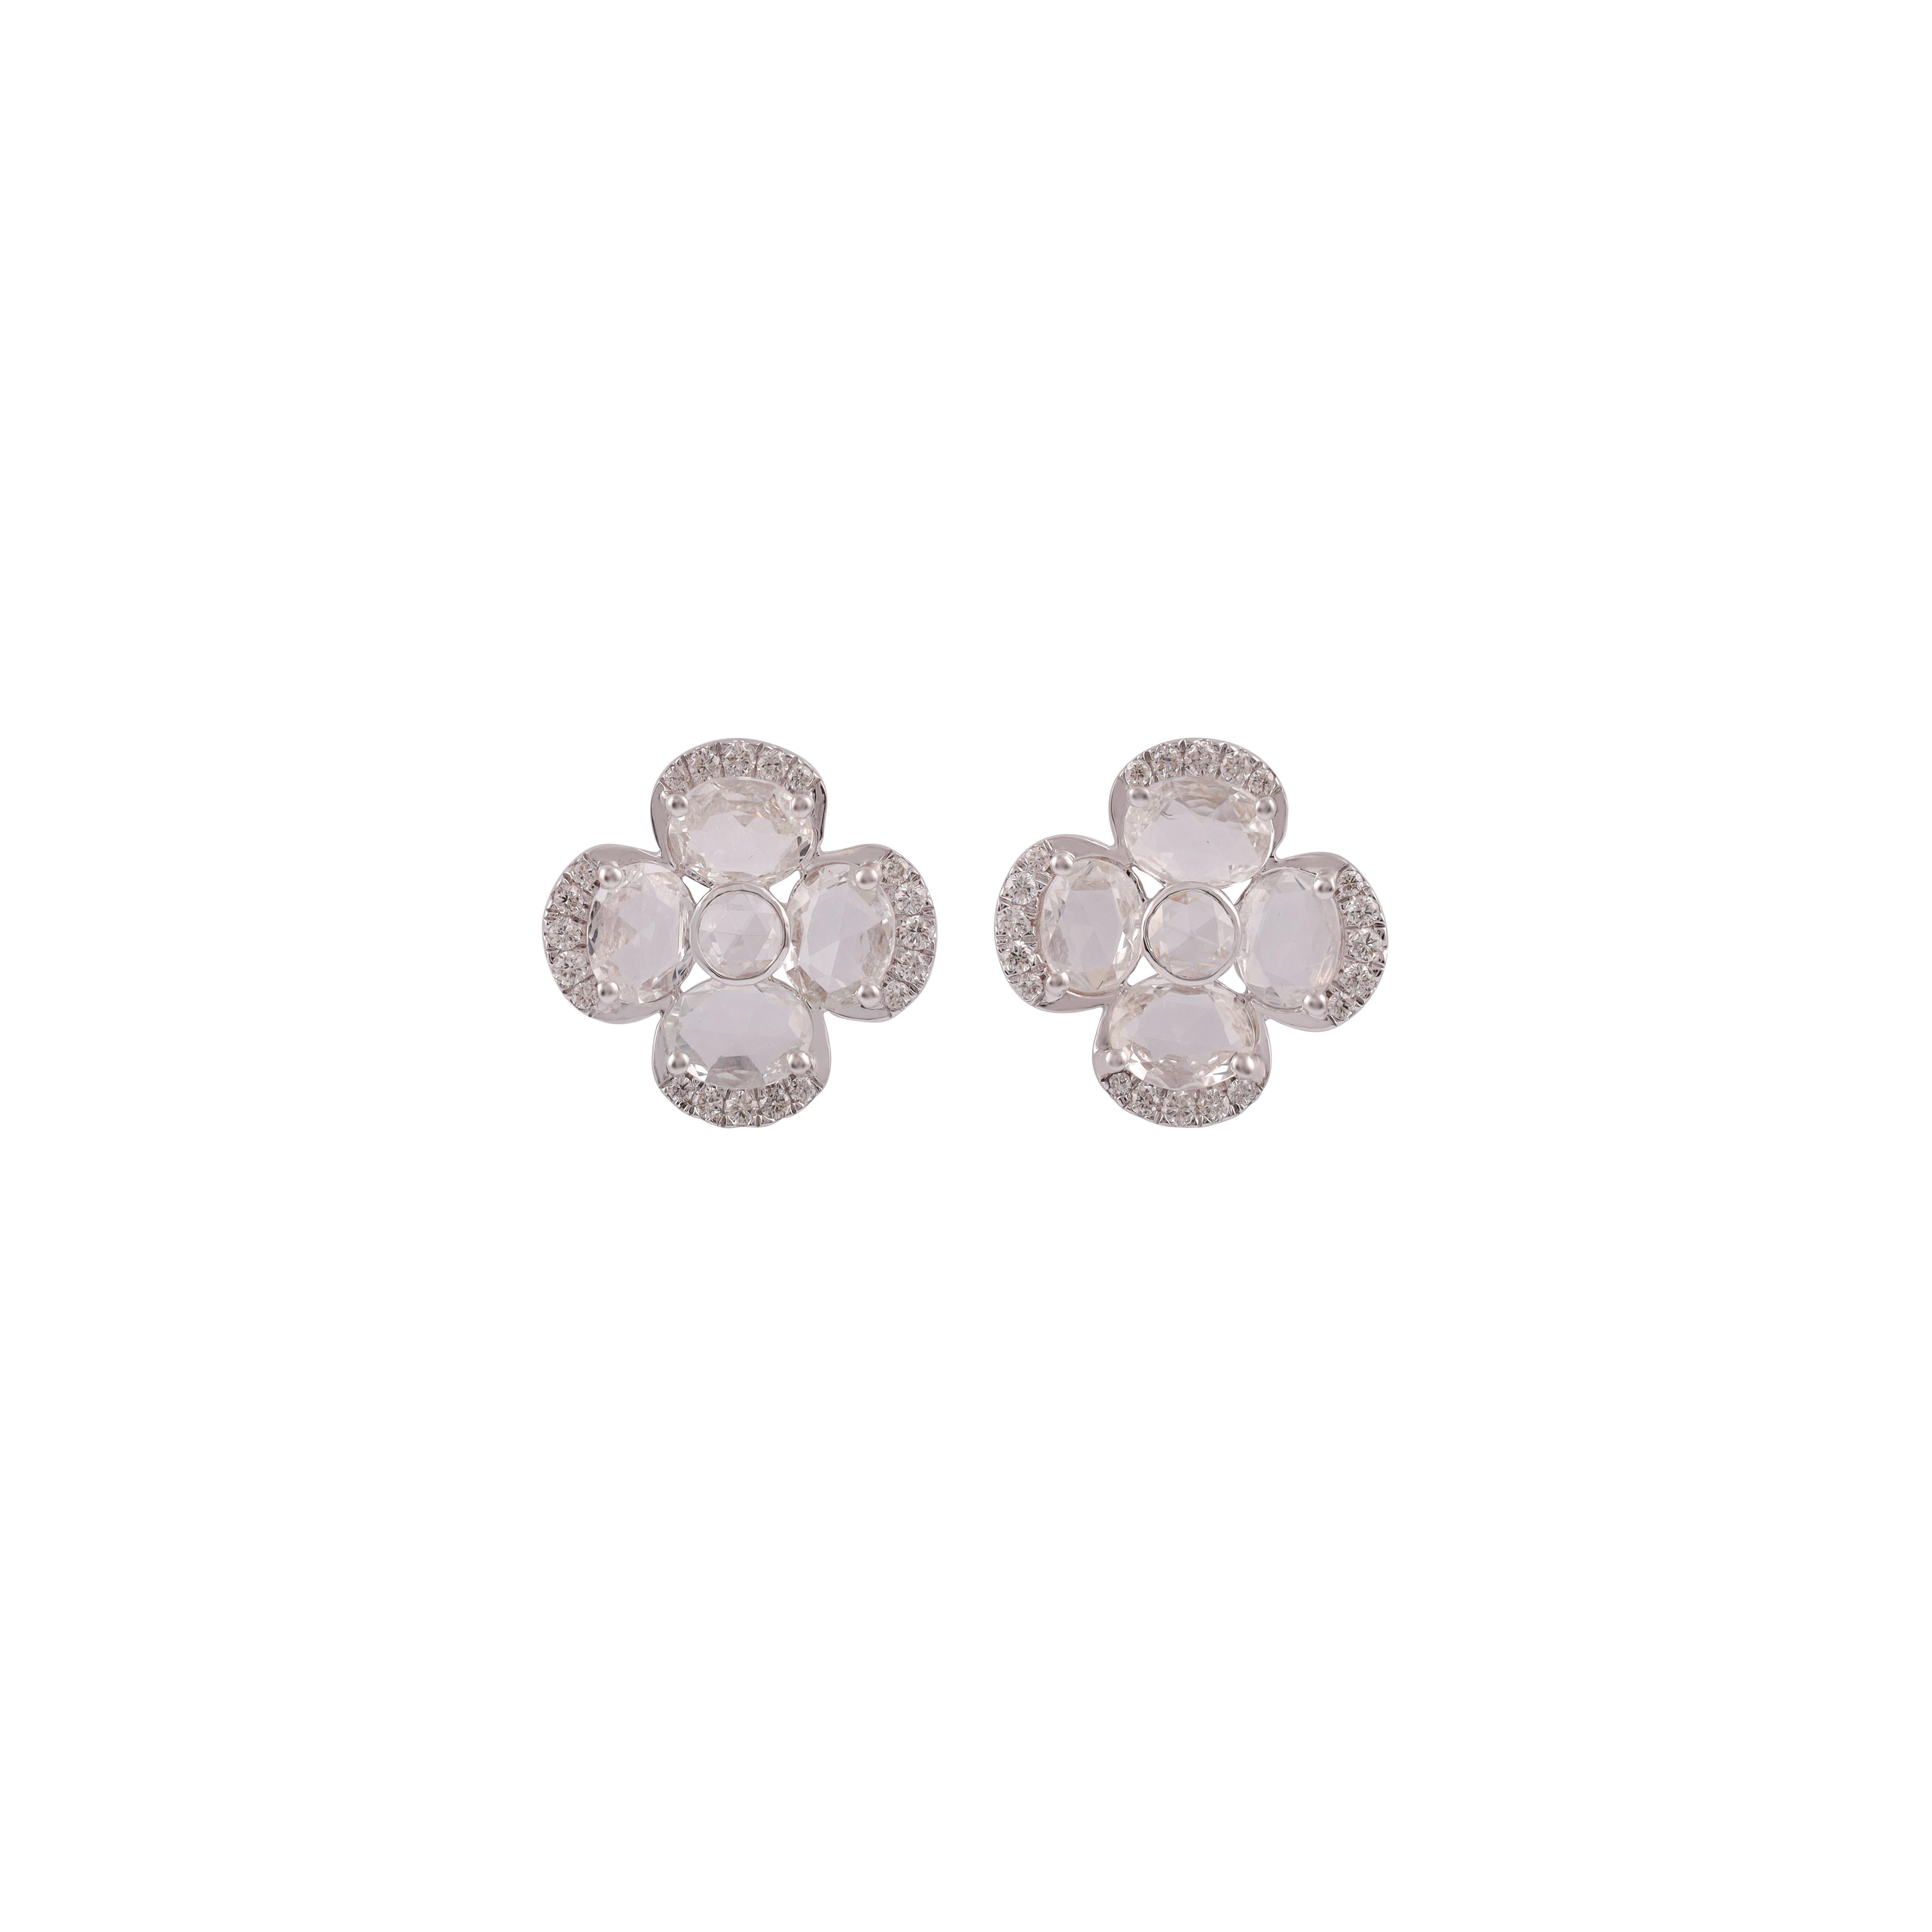 Oval Cut 2.26 Carat White Sapphire, Rose Cut & Round Diamond Earrings Studs For Sale